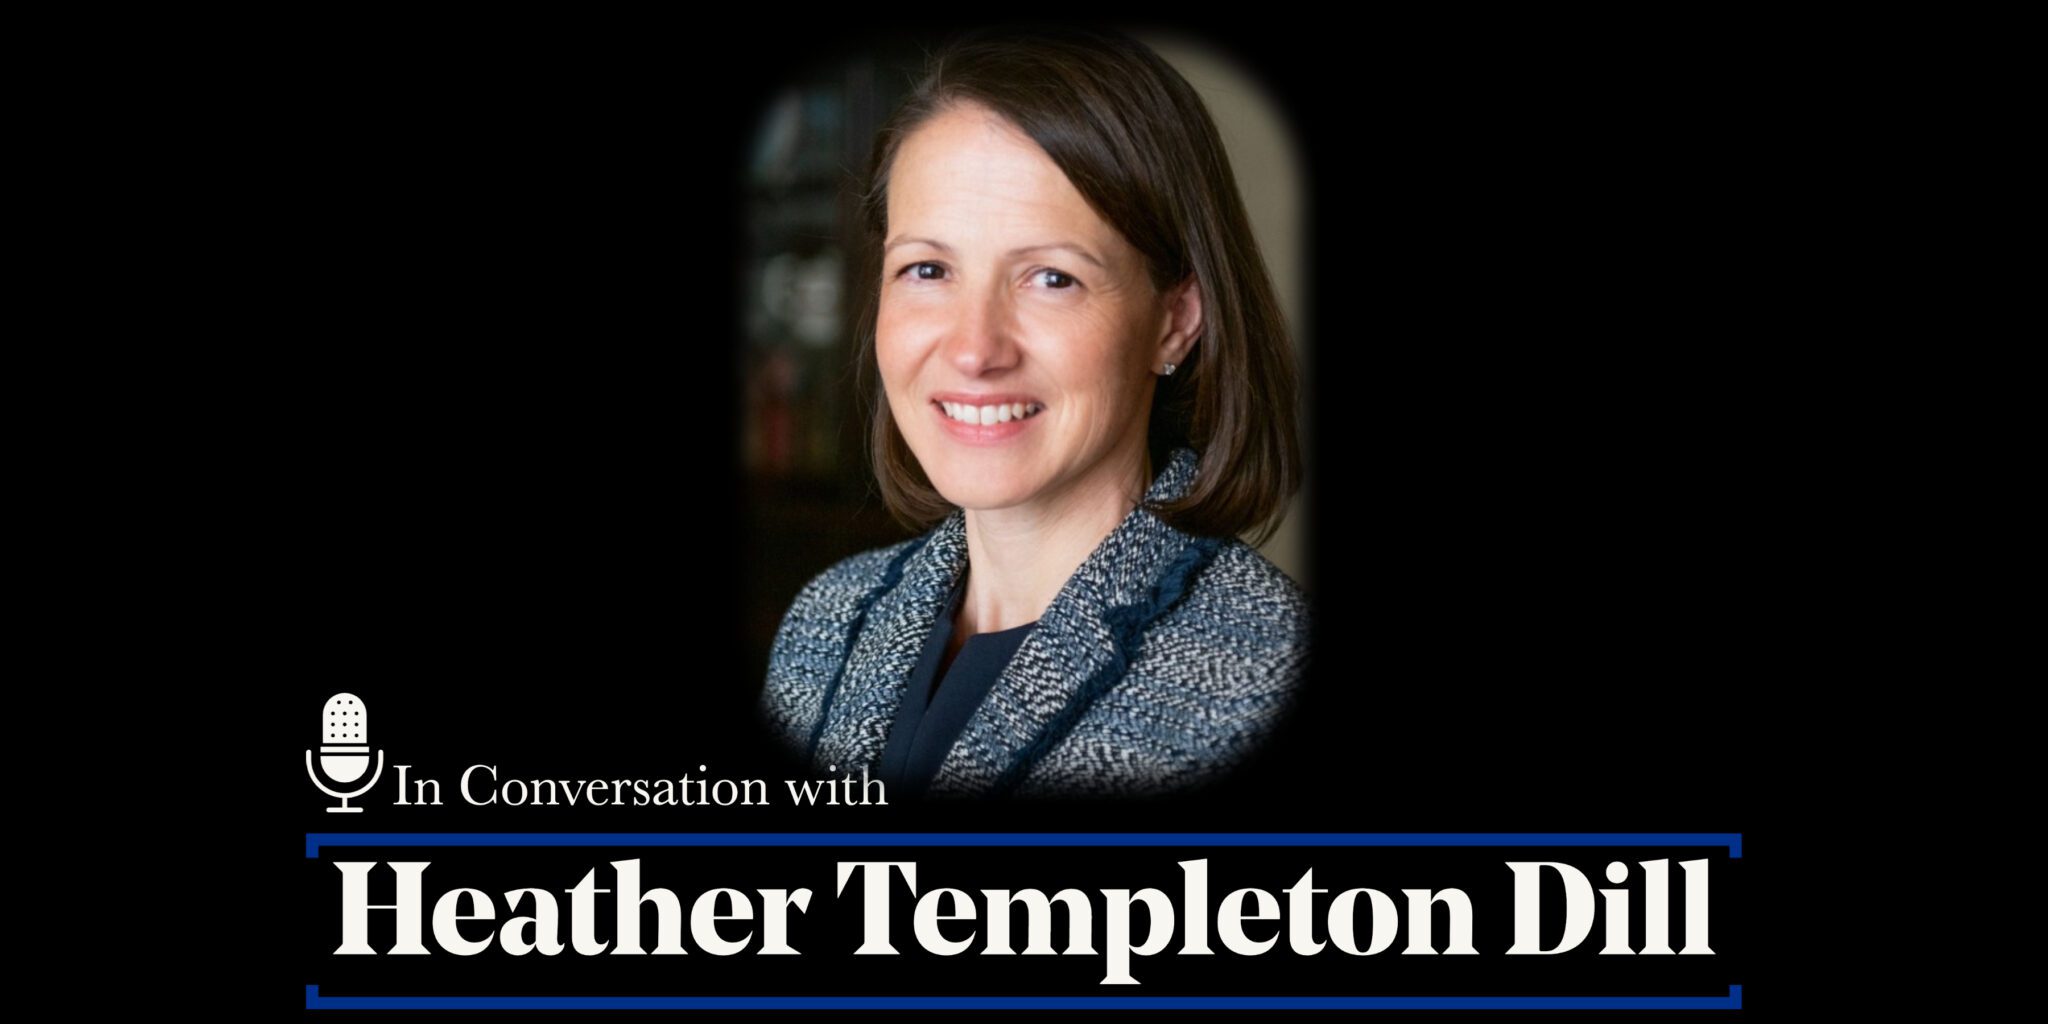 On Making a Meaningful Difference | Heather Templeton Dill Interviewed on The WOW Factor Podcast